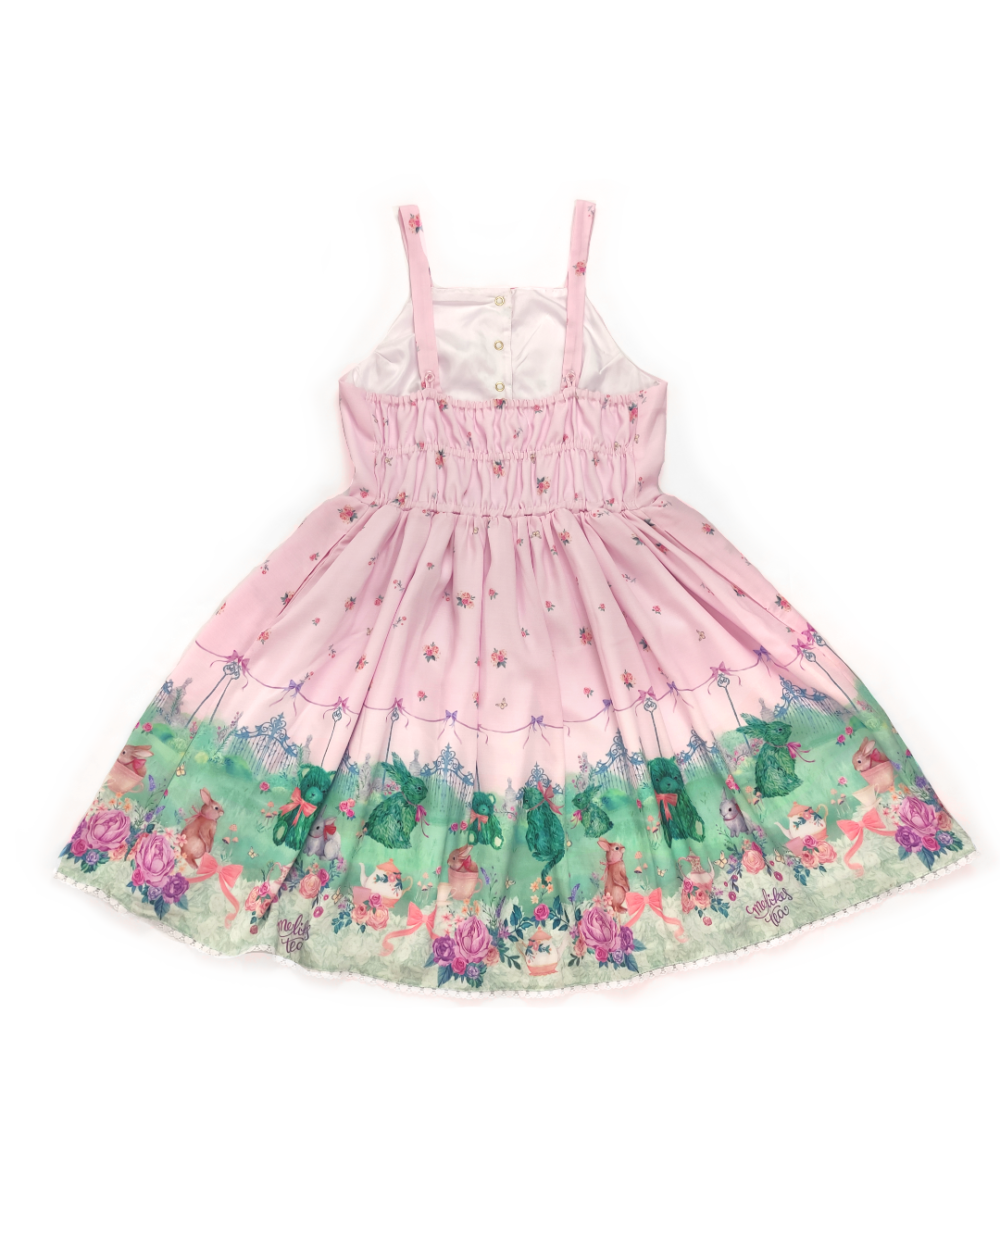 Dress made of pink polyester printed with a garden full of bunnies, teddy bears, cups and teapots, flowers and a beautiful lawn.